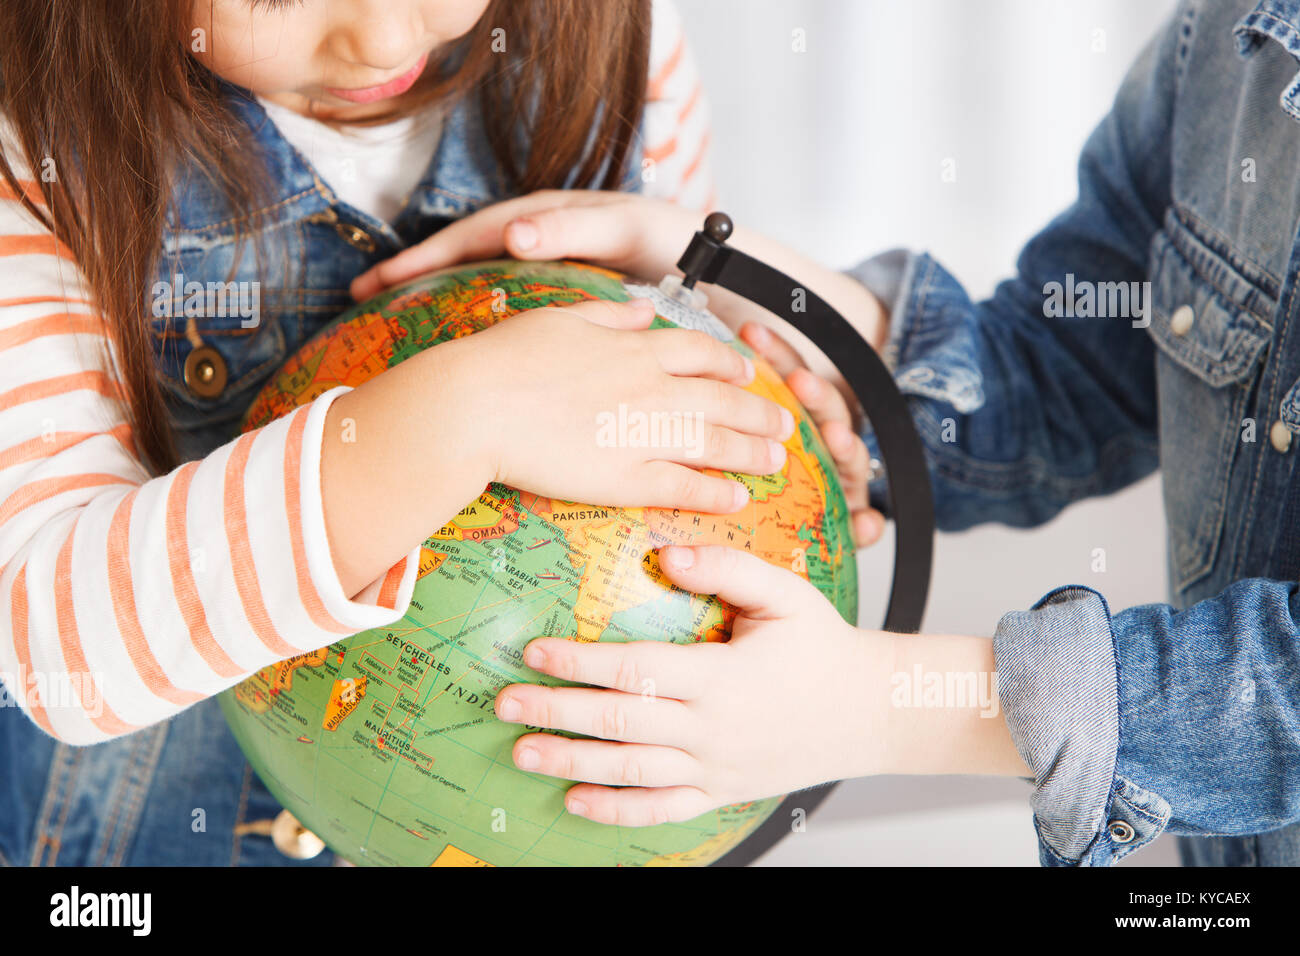 Kids on Geography Lesson Stock Photo